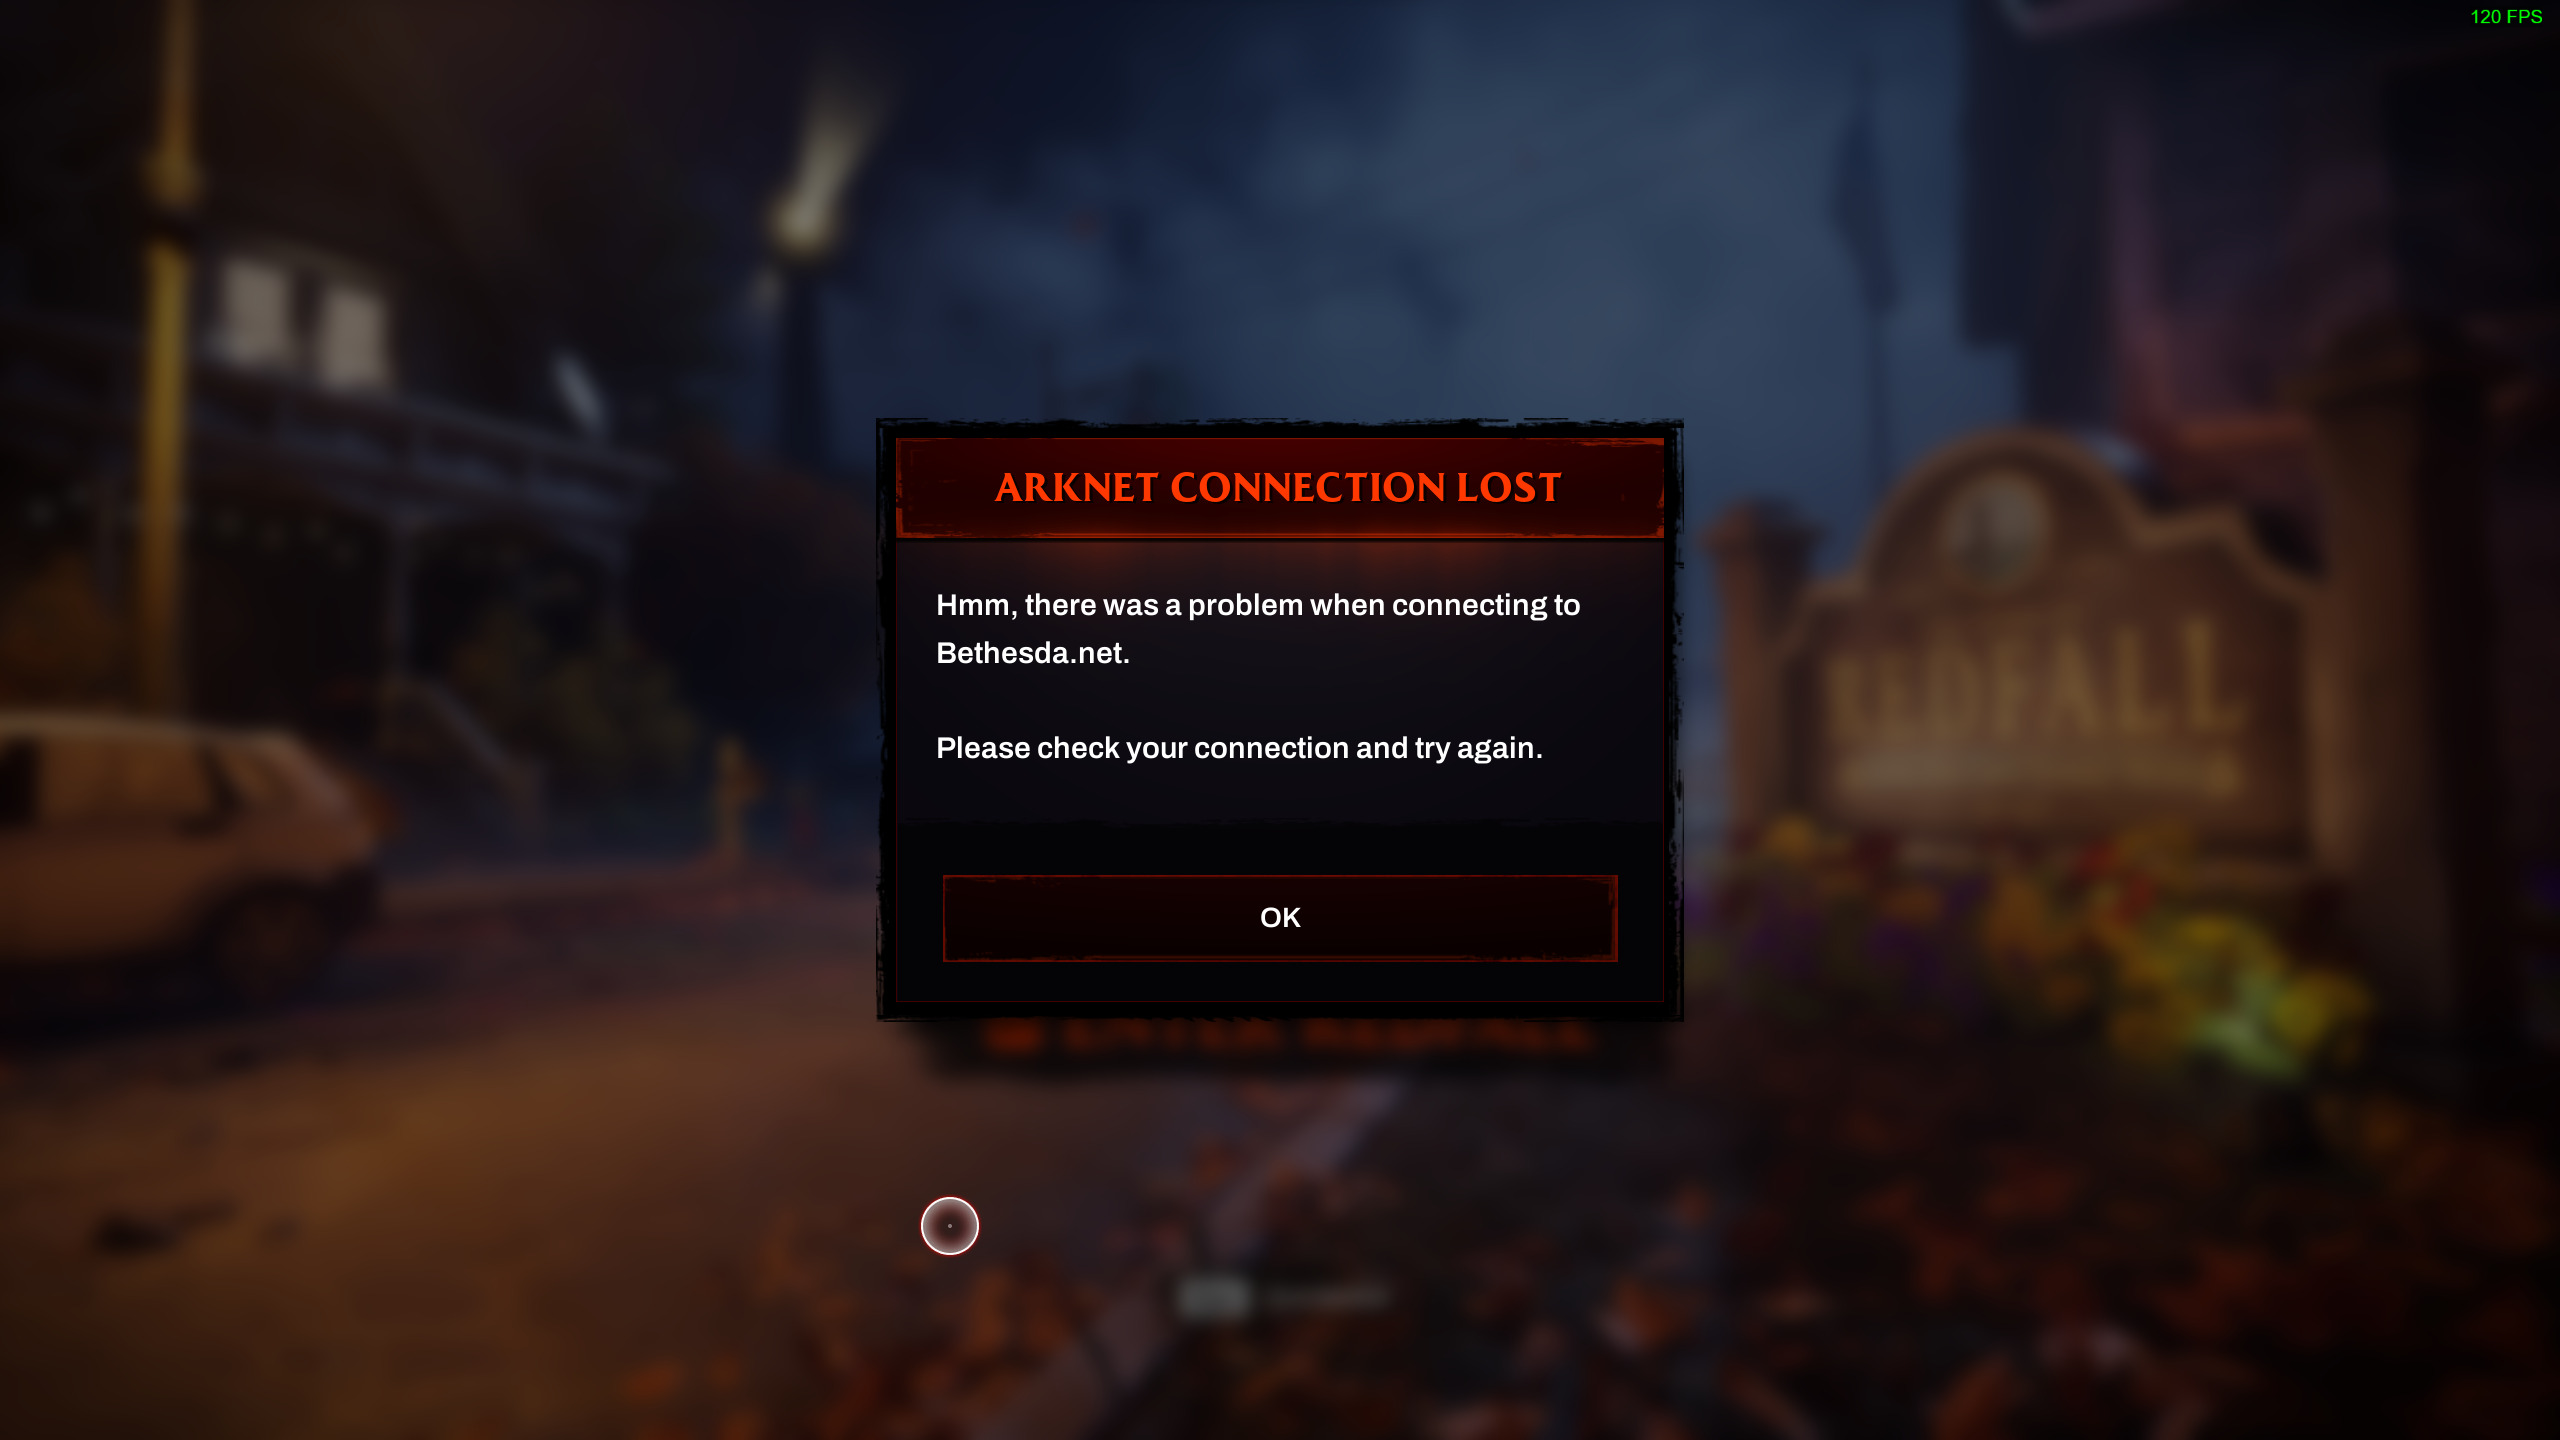 An always-online requirement on top of a flawed game? What a travesty